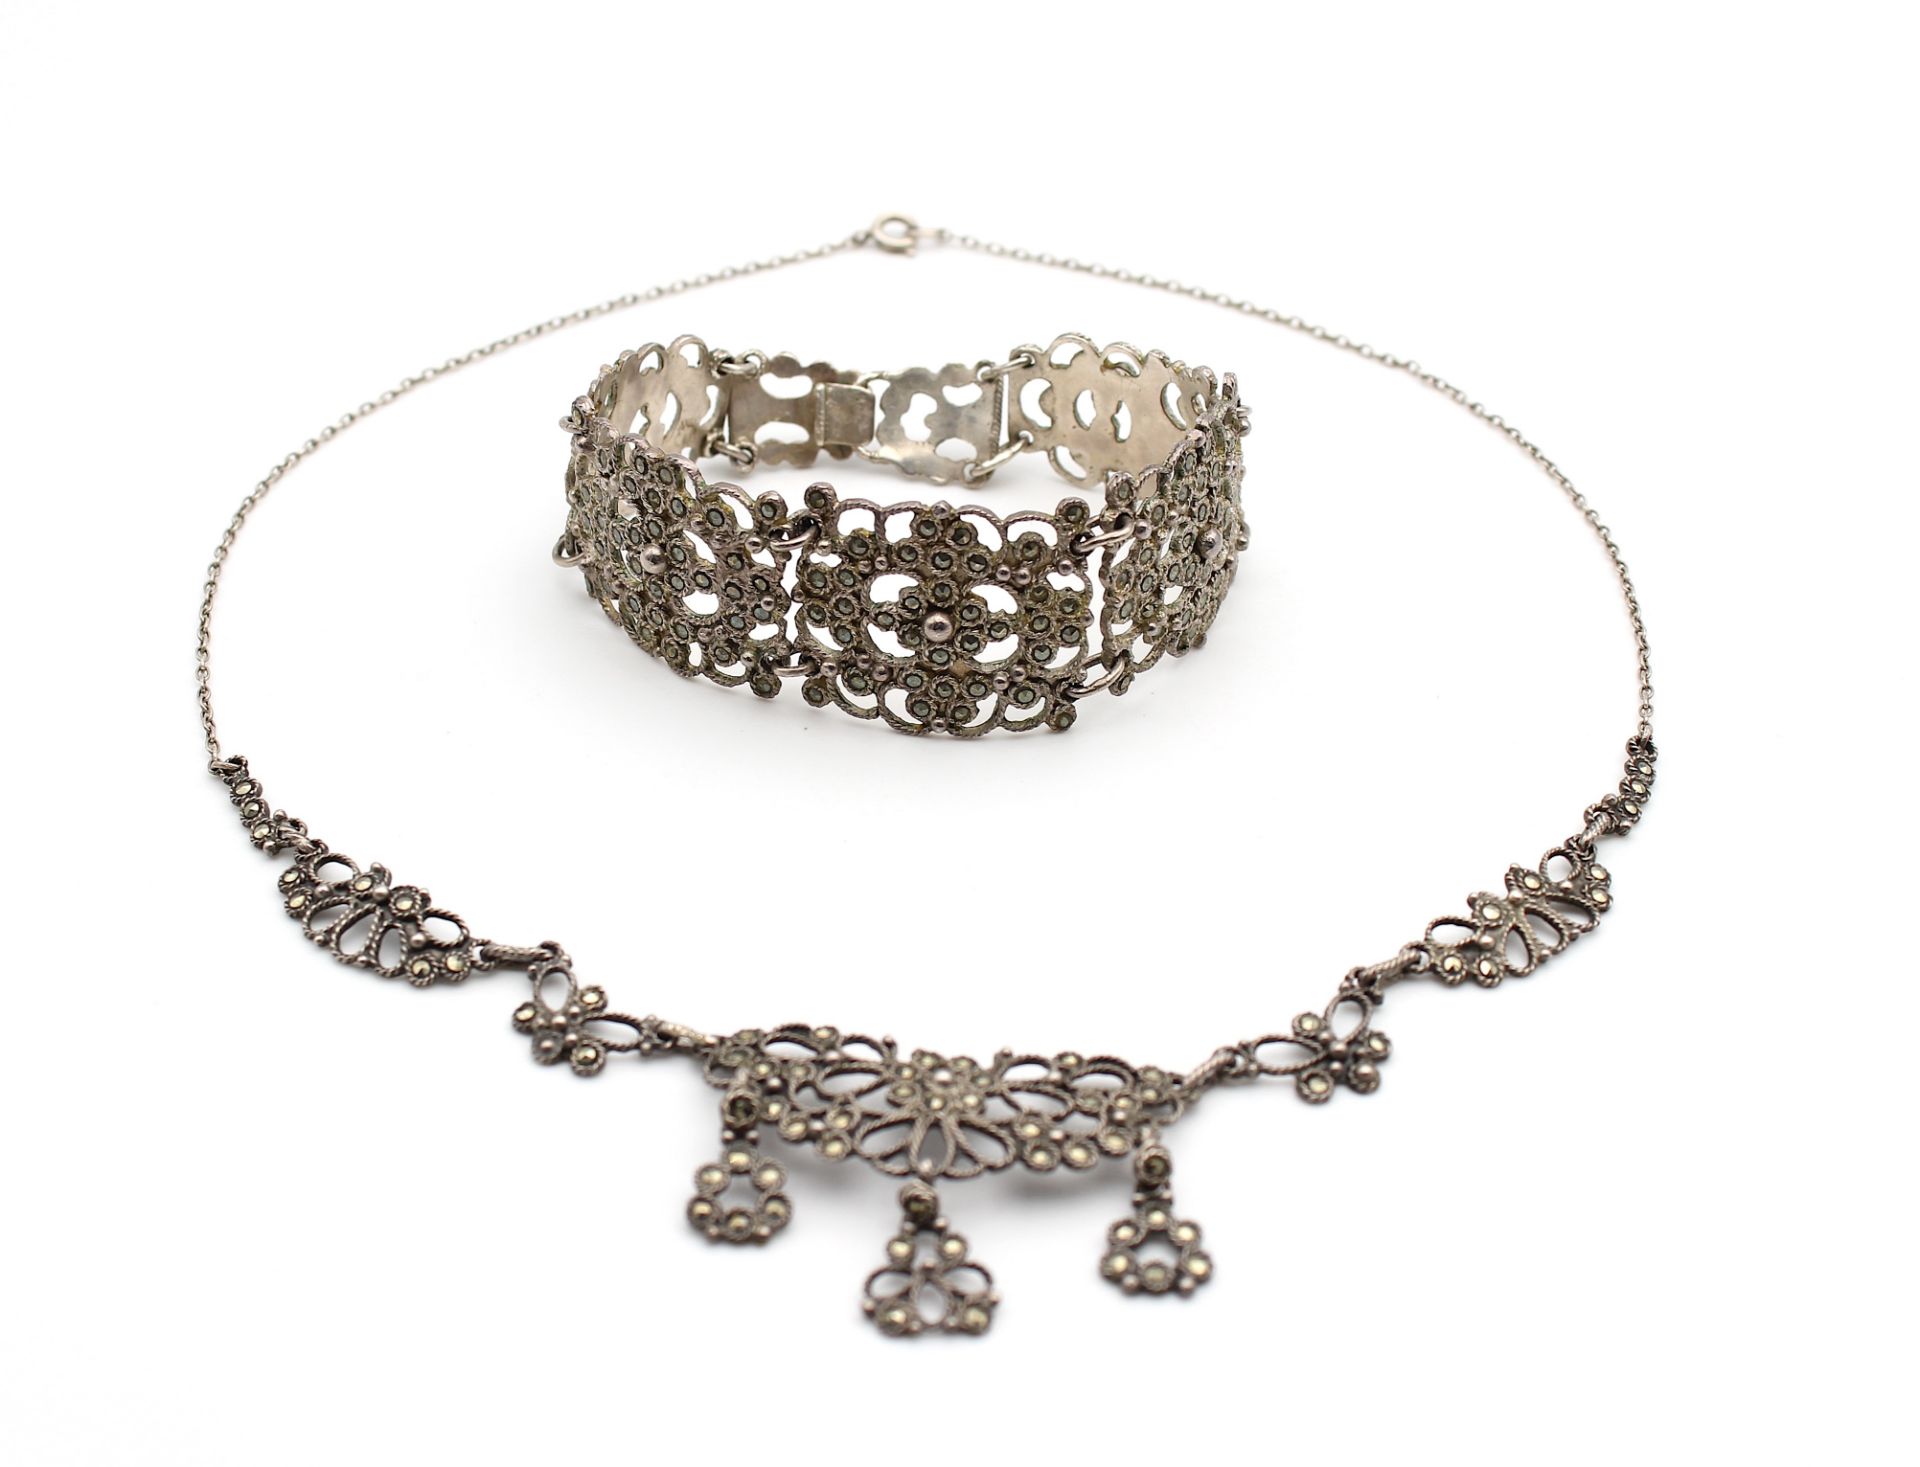 Bracelet and necklace in silver with marcasites